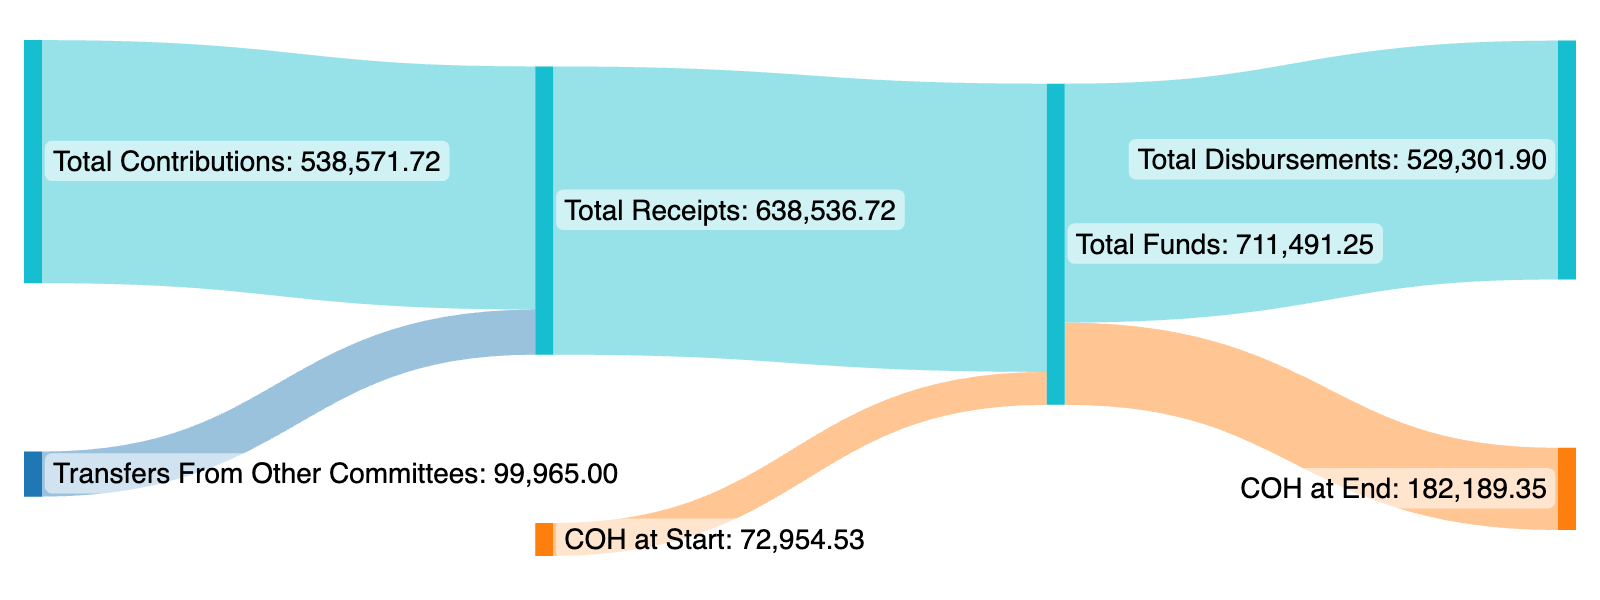 The same Sankey diagram as above plus two new flows leading into 'Total Receipts': 'Total Contributions' and 'Transfers from Other Committees'